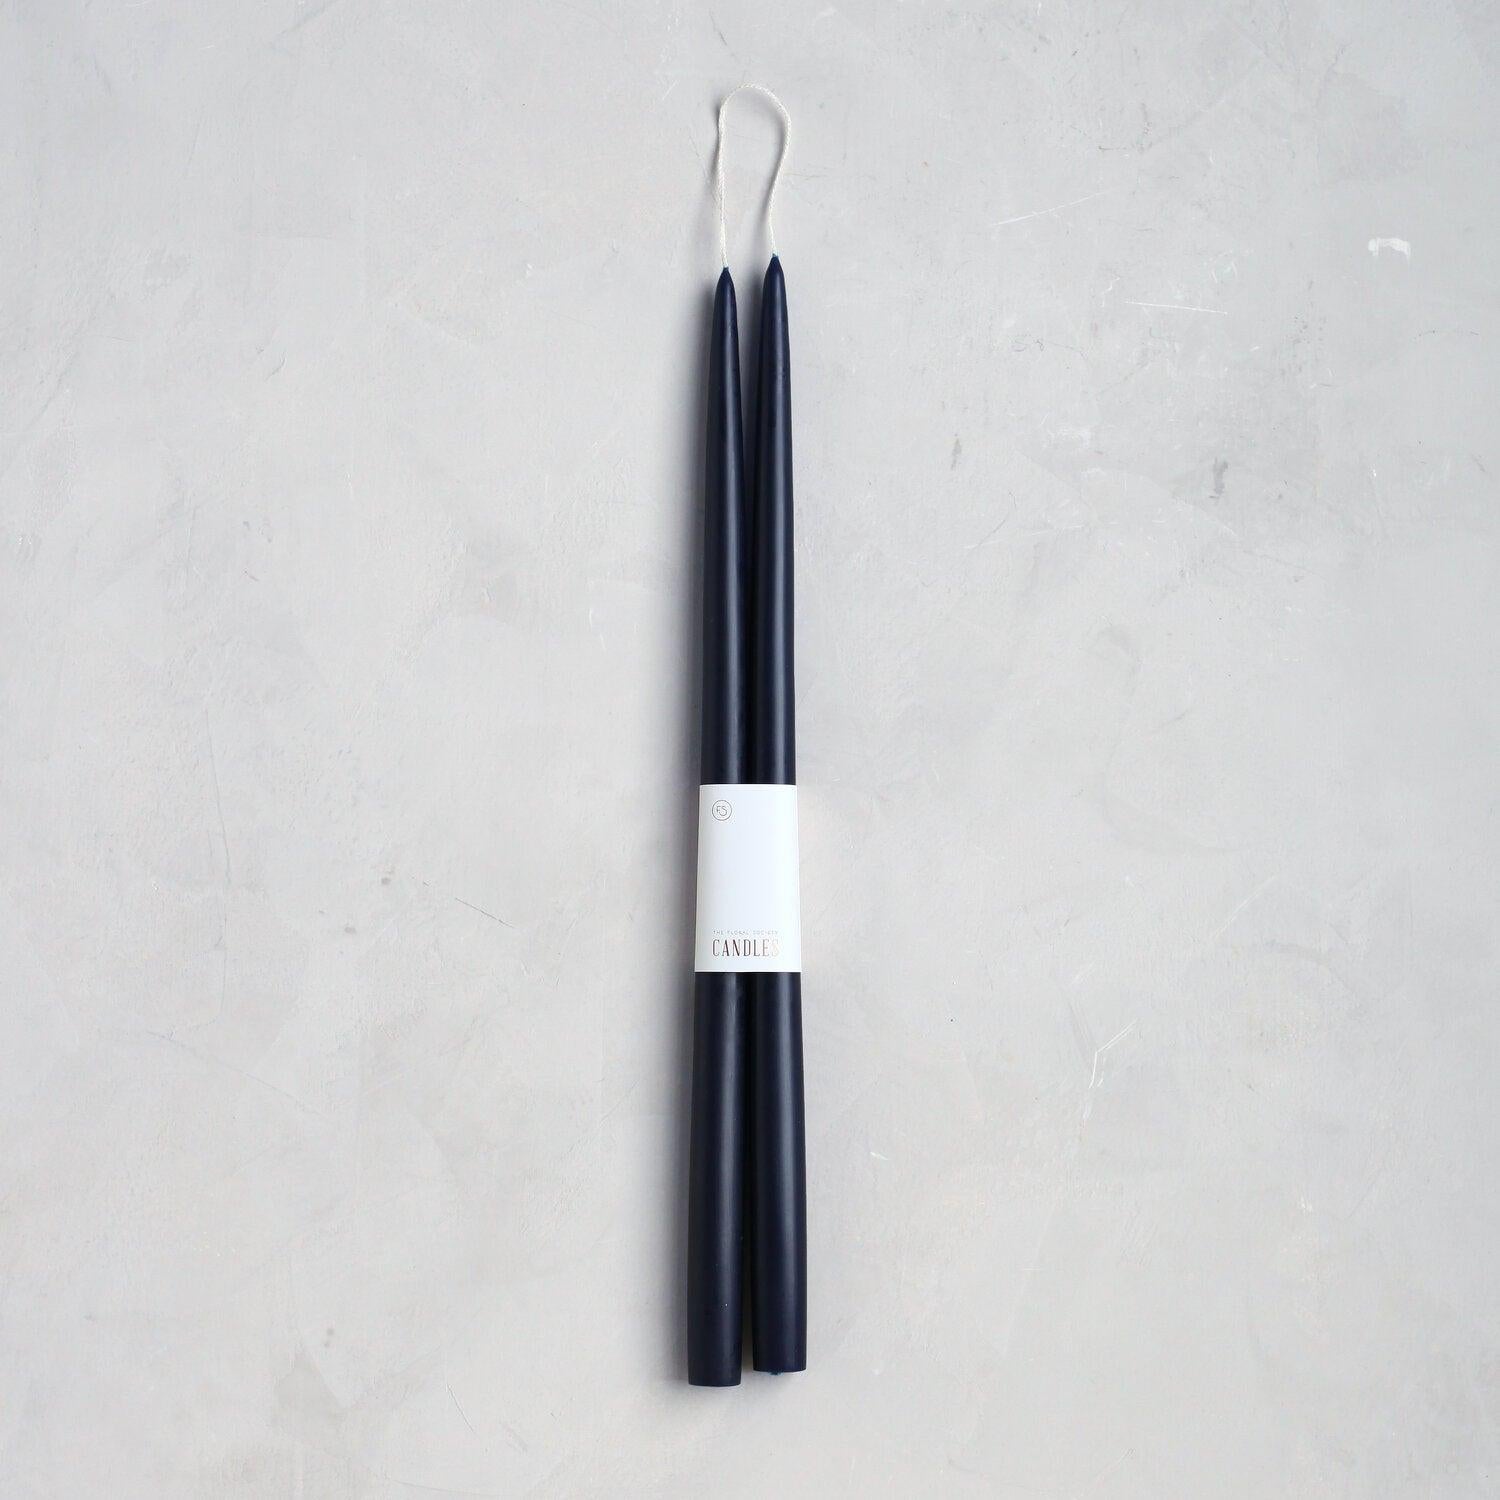 Pair of Taper Candles - Midnight